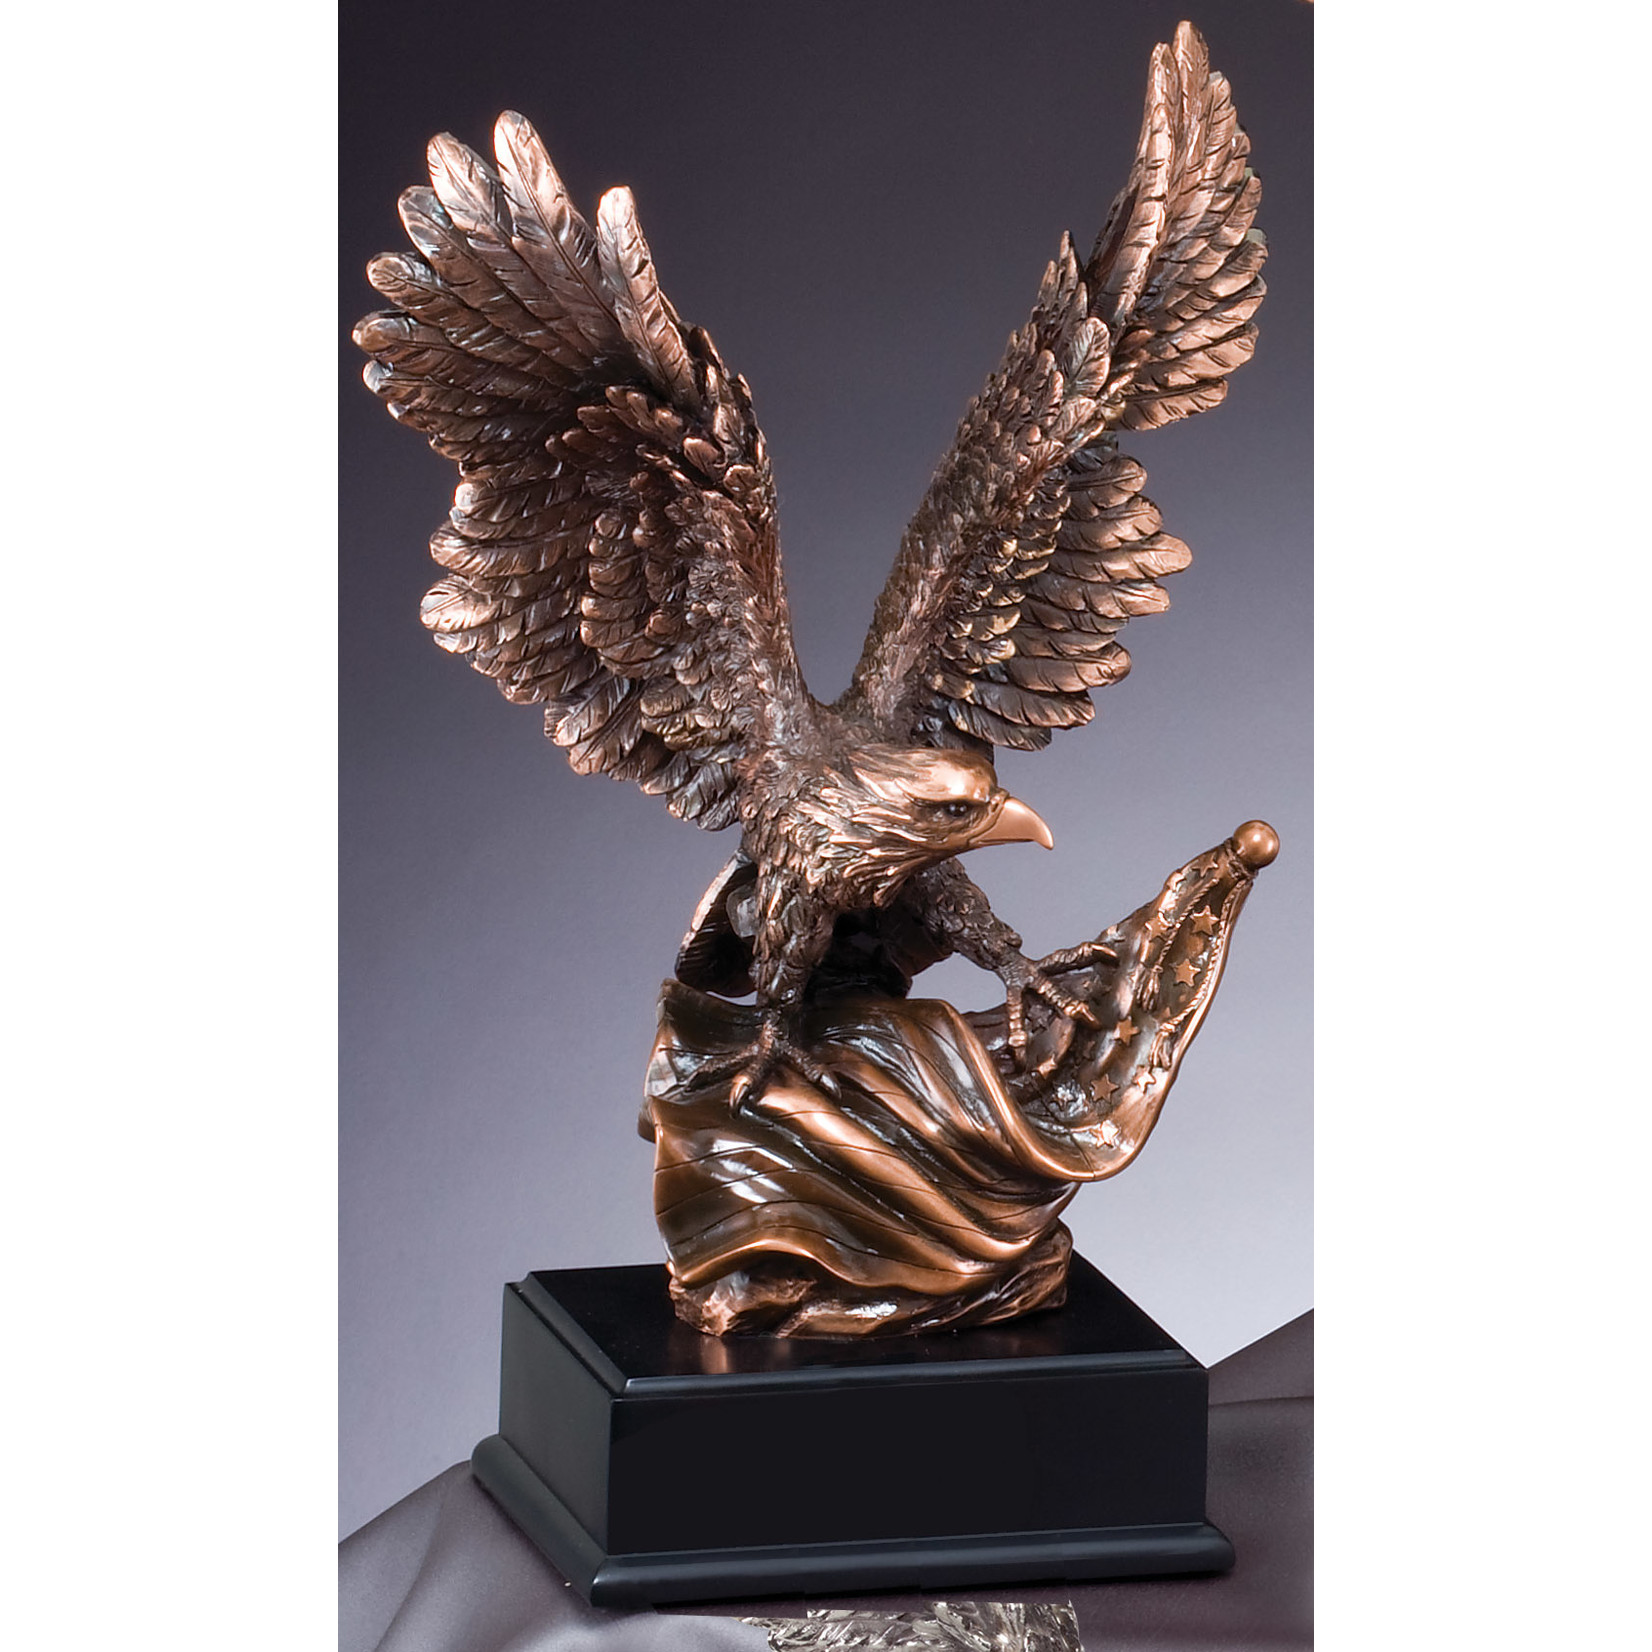 Marco 14" EAGLE ON A BLACK BASE includes engraving